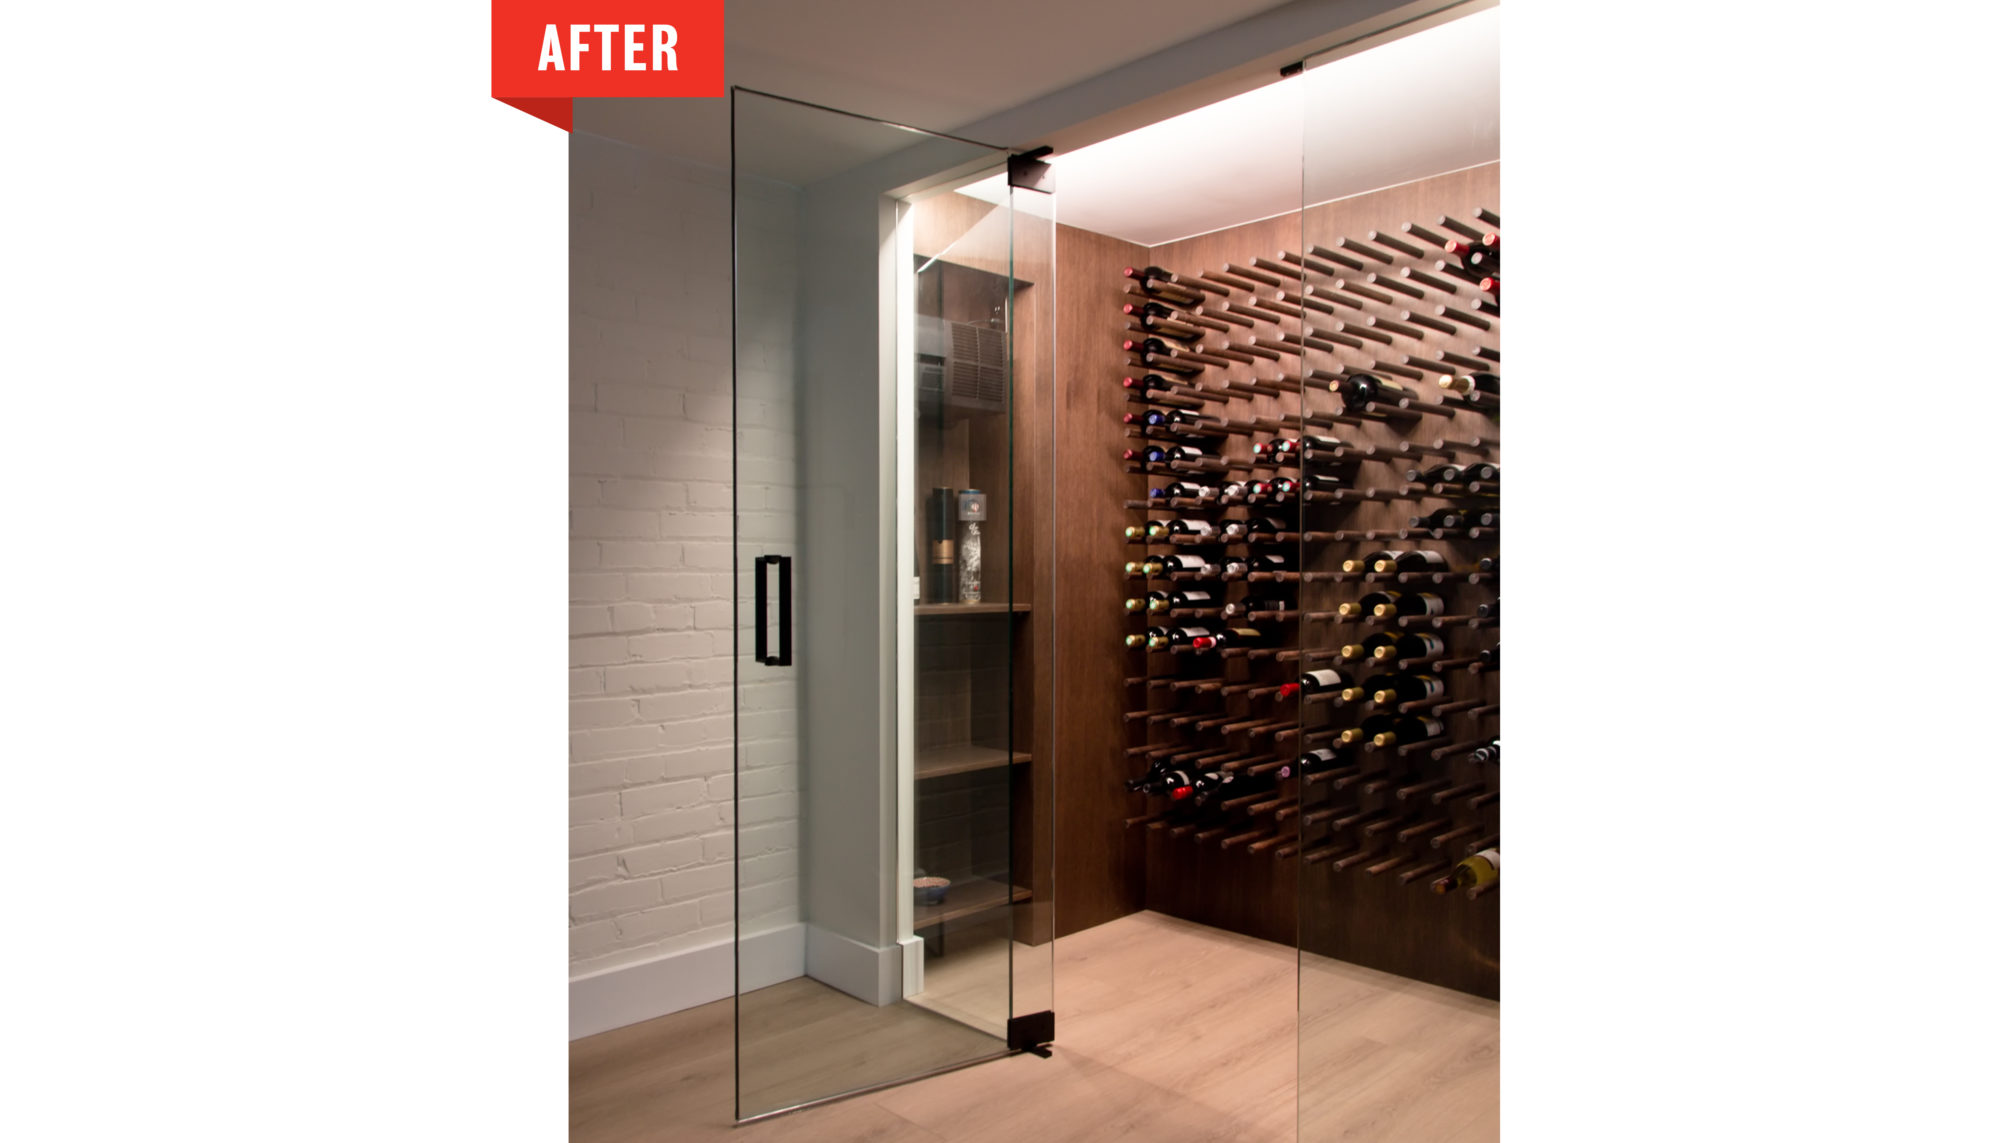 The new wine cellar is chic temperature-controlled showcase. 